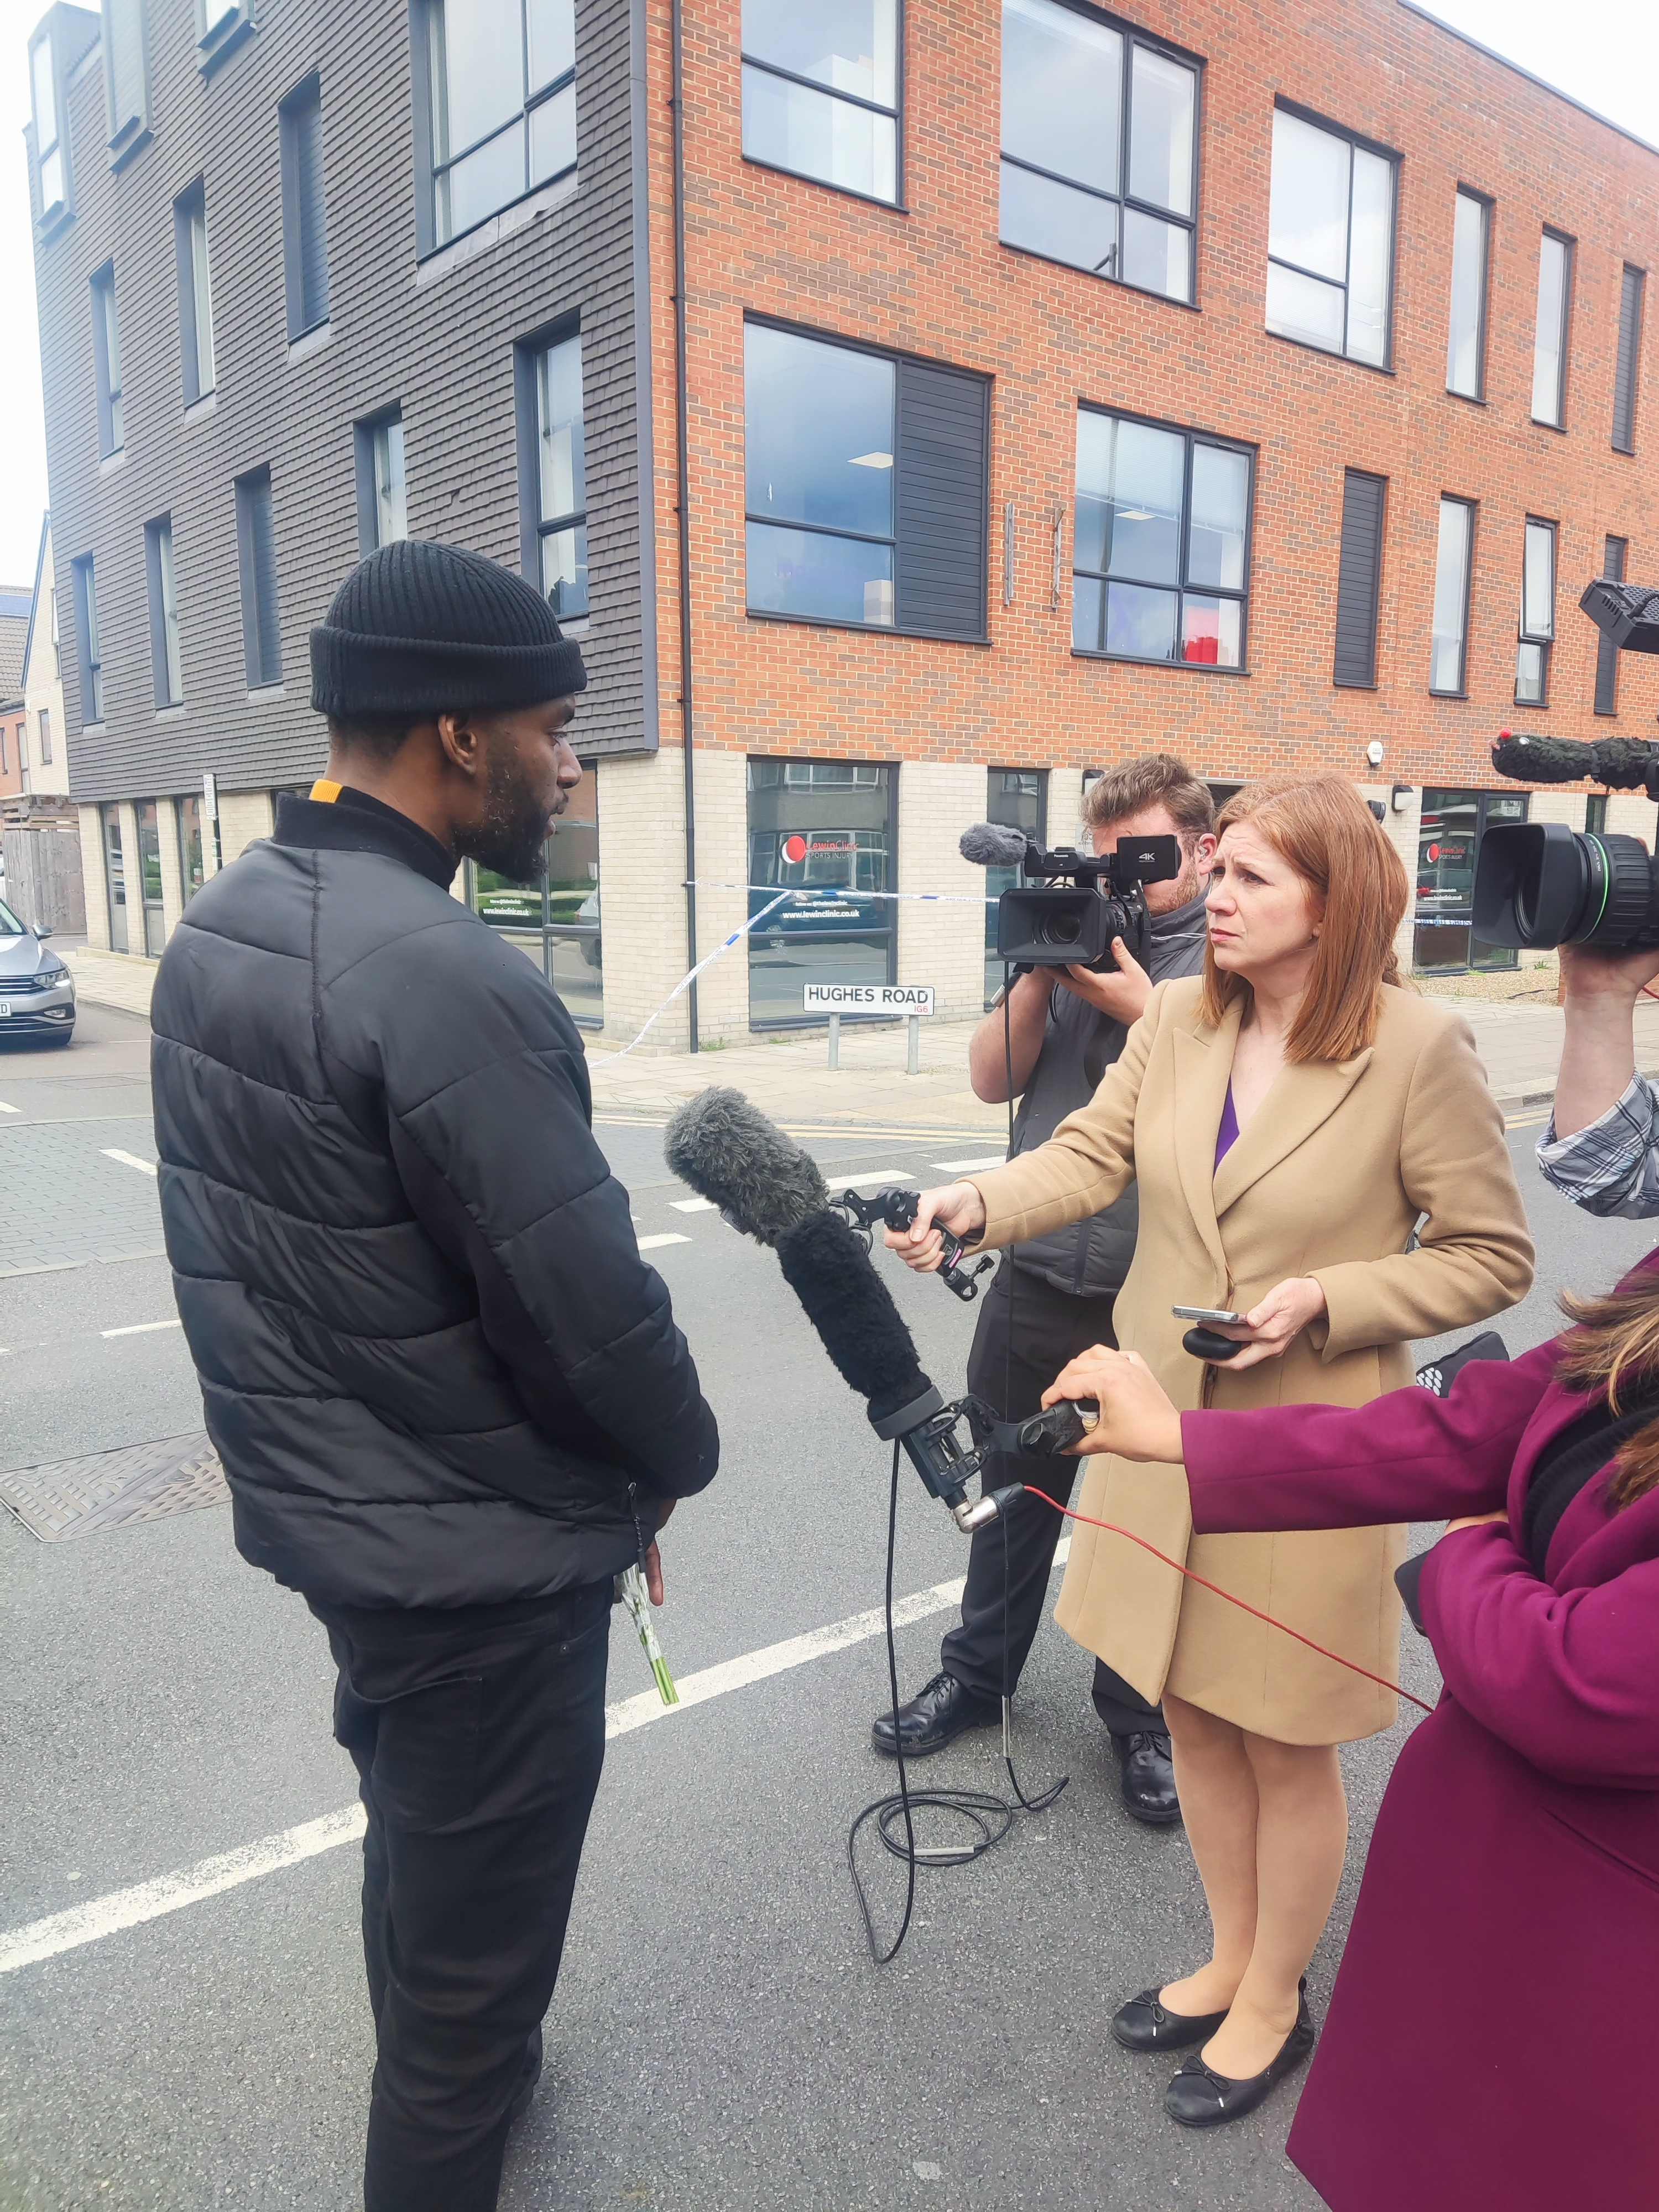 Faron Paul speaking to reporters at the scene of the Hainault attack